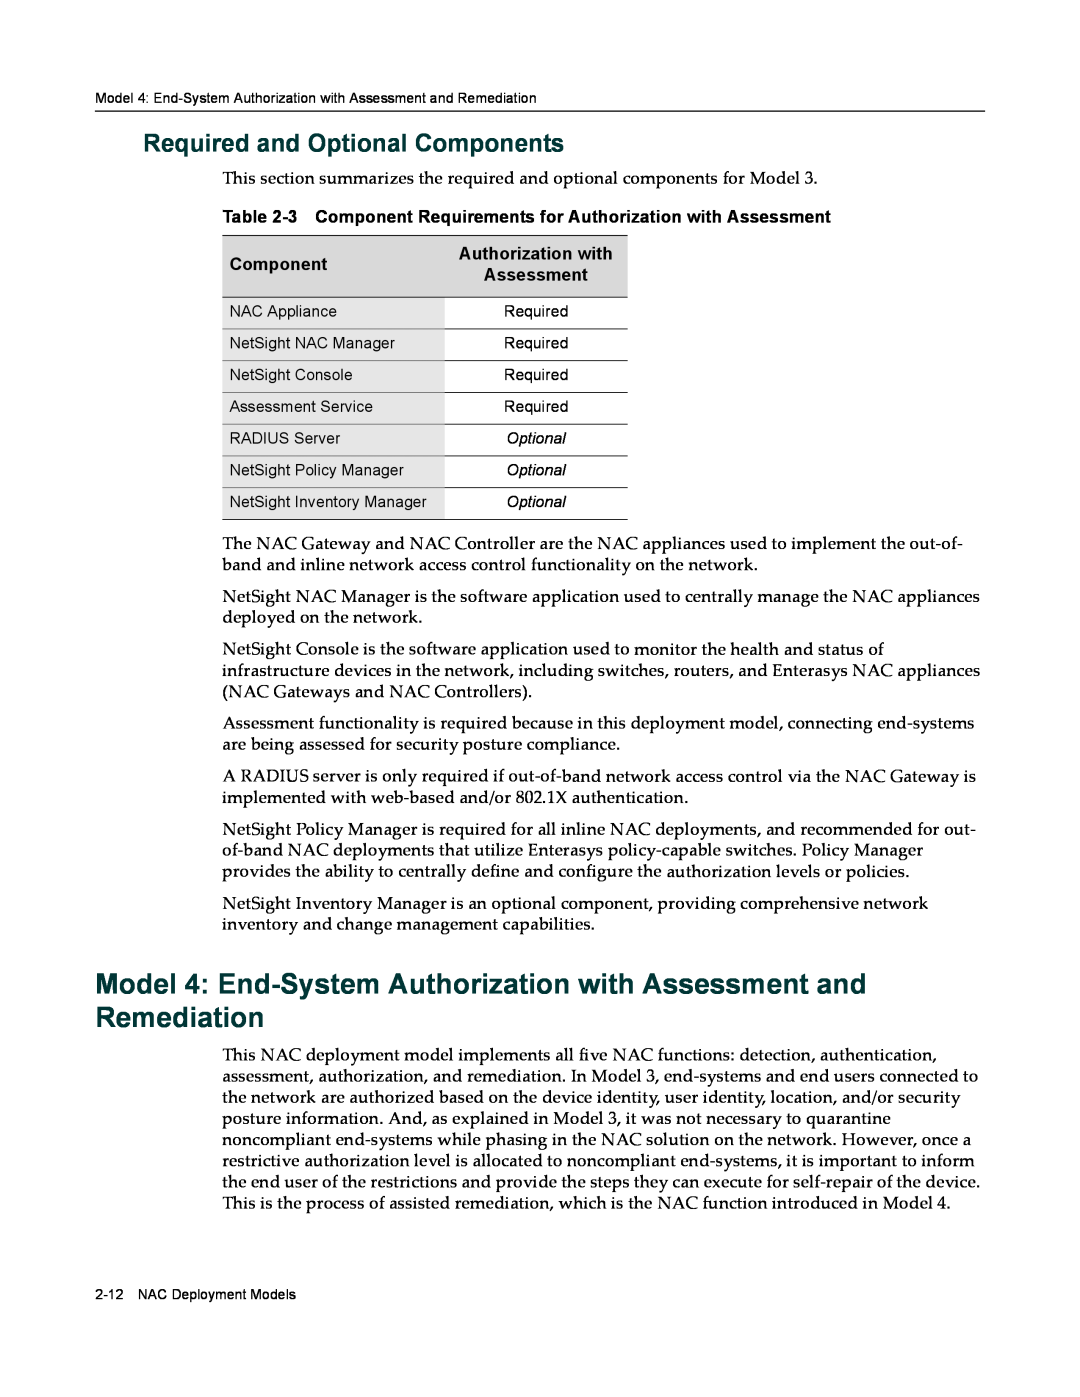 Enterasys Networks 9034385 manual Model 4 End-System Authorization with Assessment and Remediation, Component 